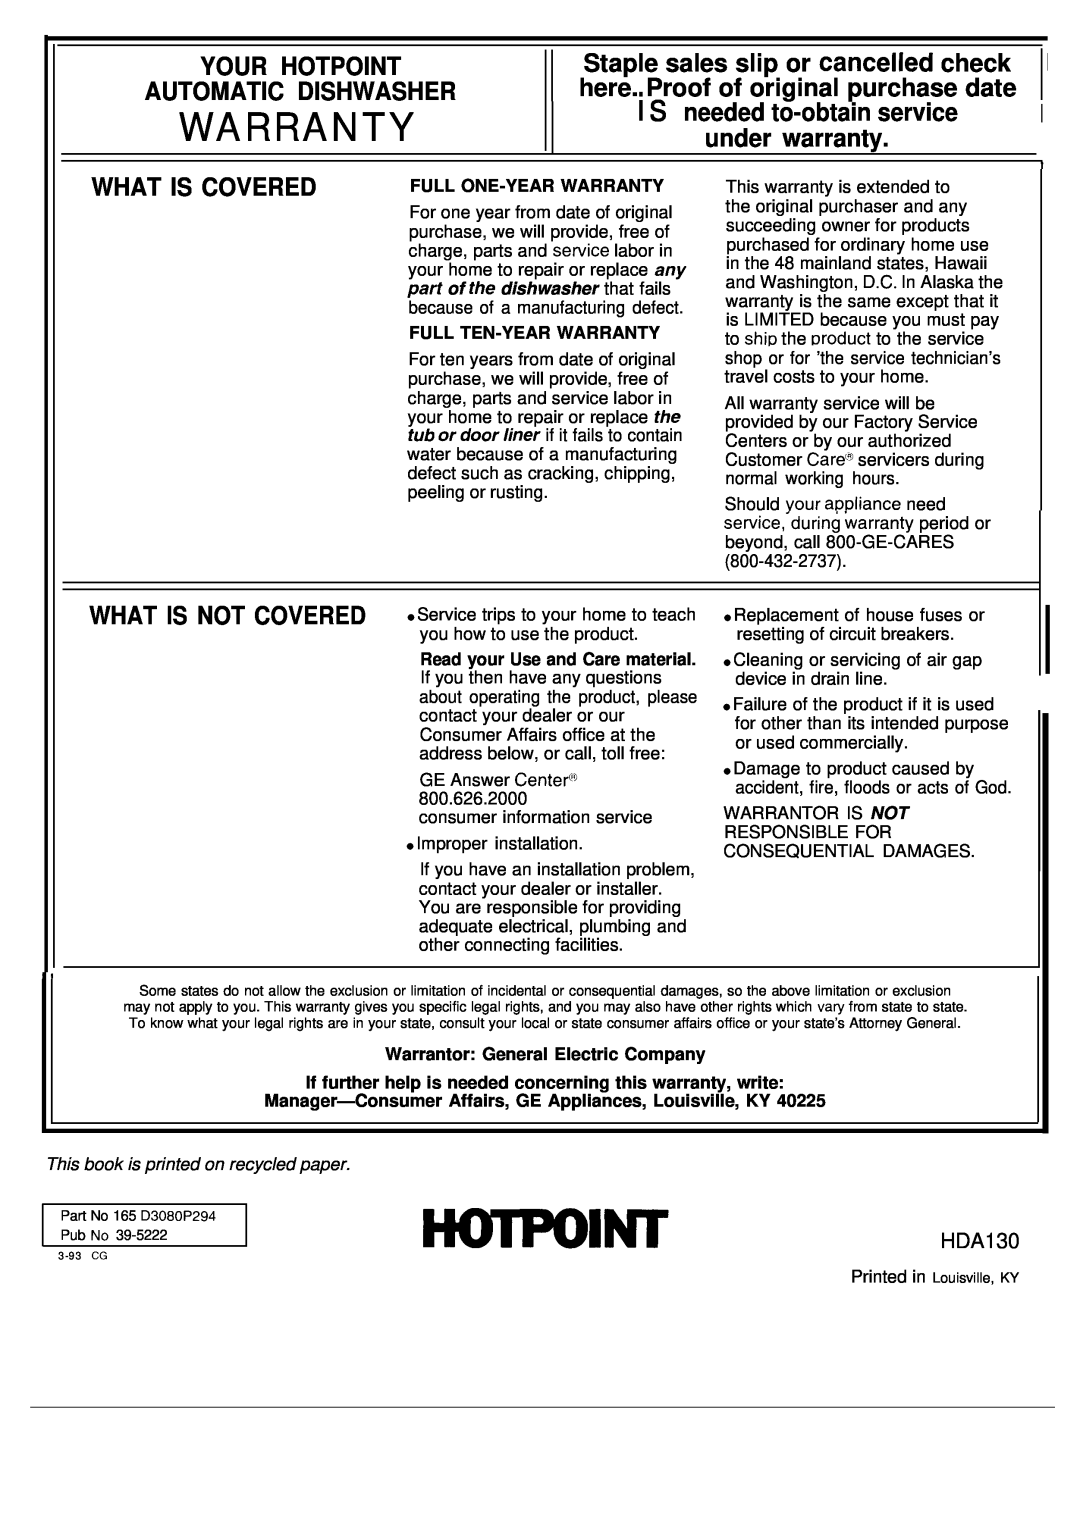 Hotpoint HDA130S warranty Warranty, Staple sales slip or cancelled check, What Is Covered, What Is Not Covered, I I t 